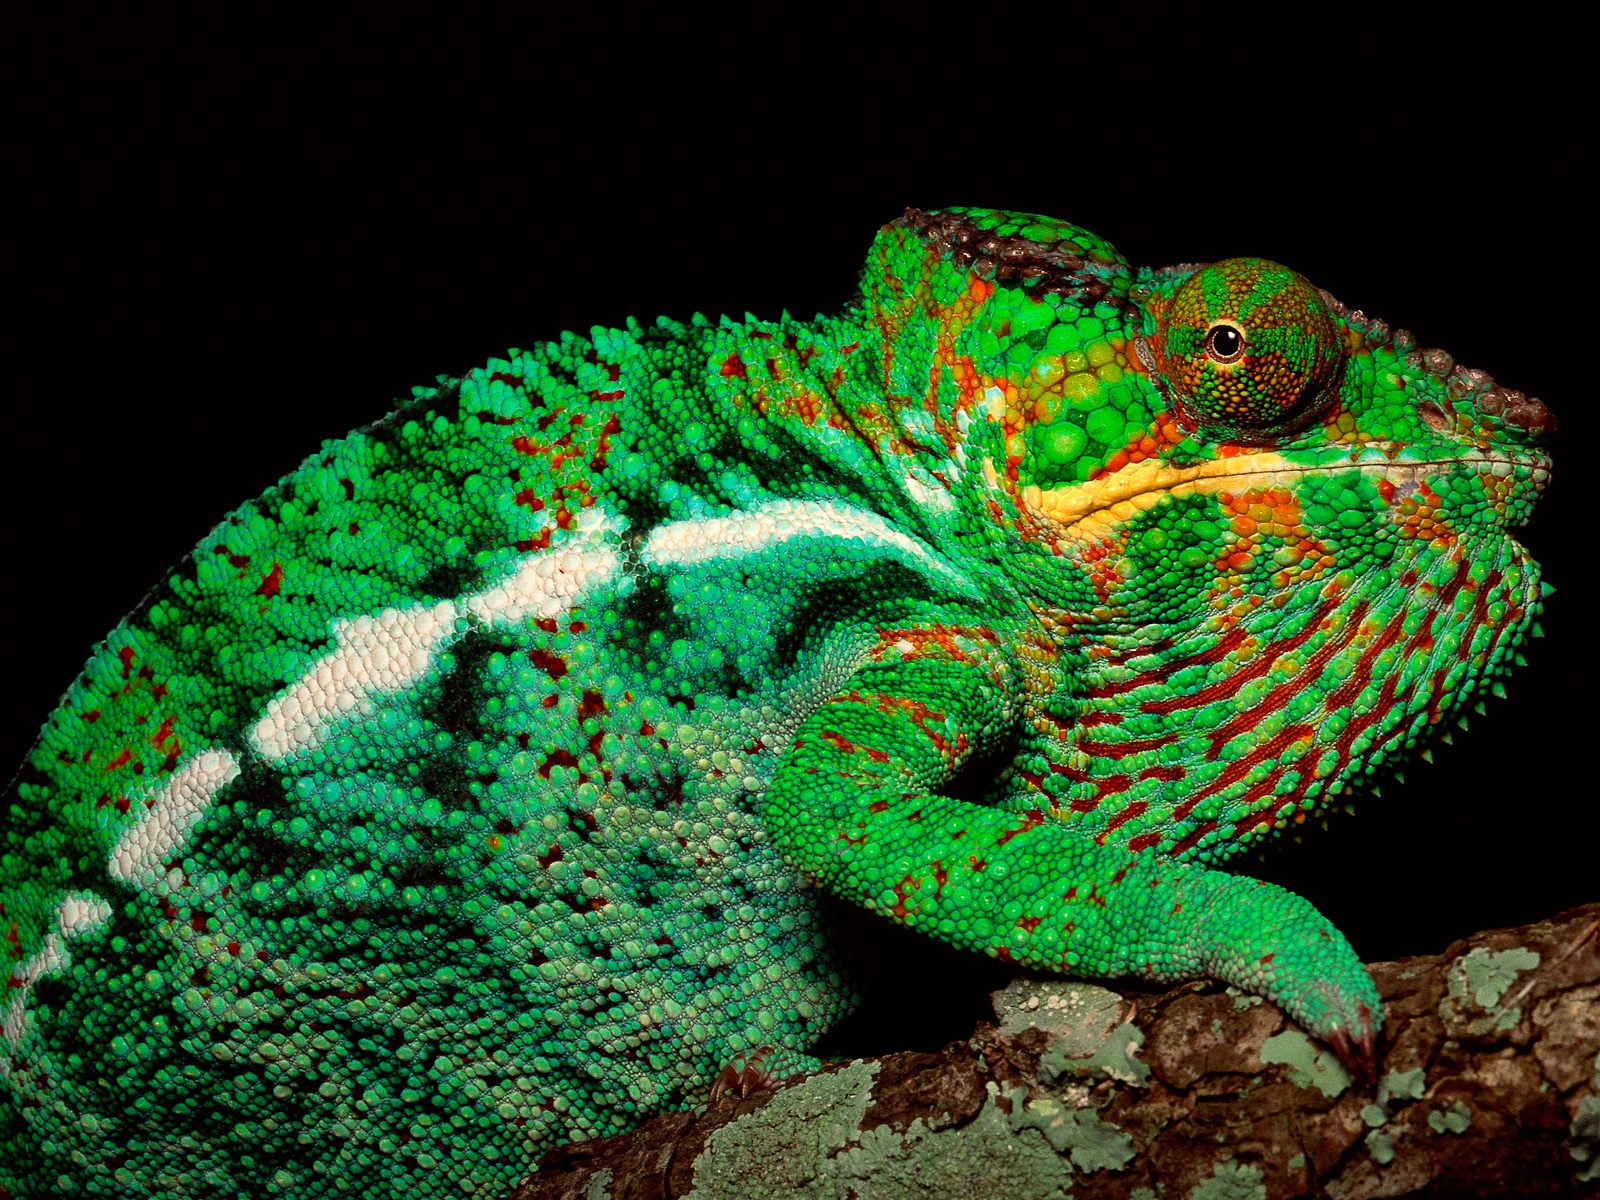 Very Sweet and Cute Animals: Beautiful and colorful Panther Chameleon